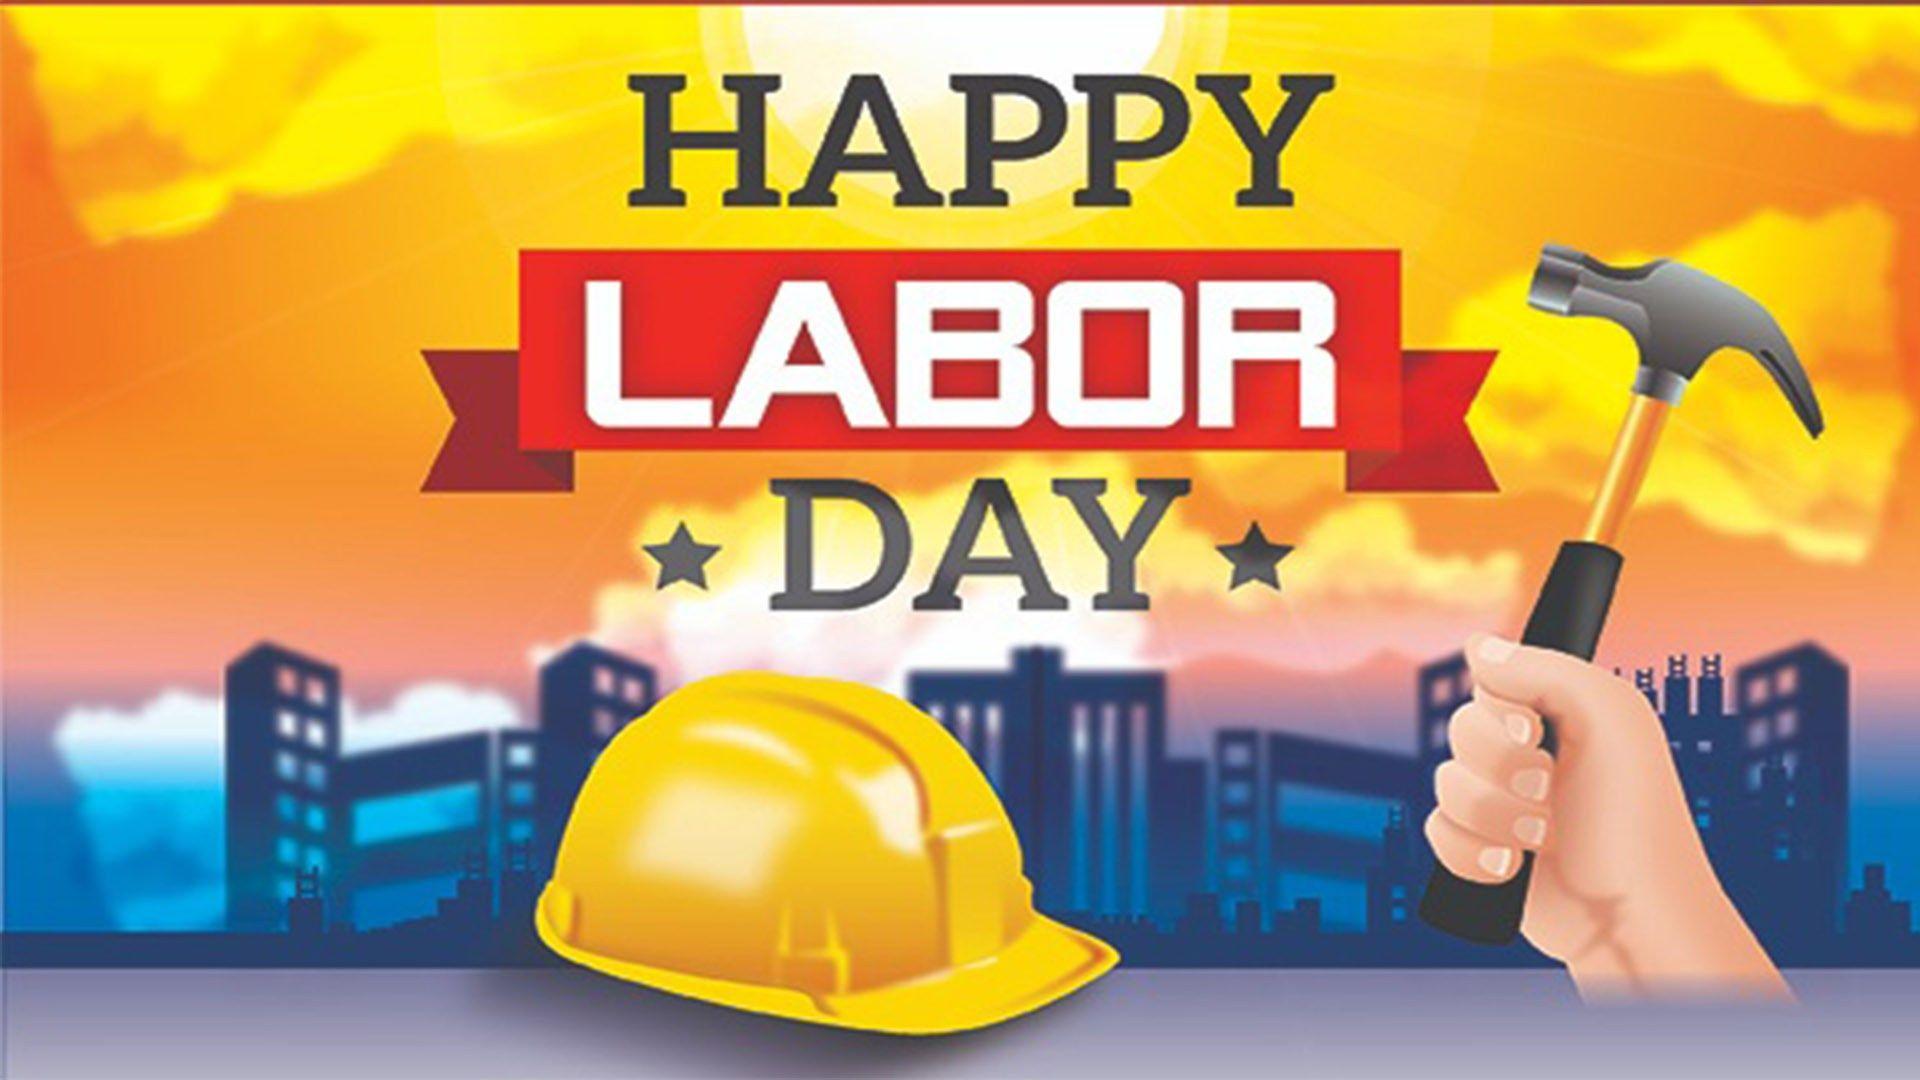 Happy Labor Day 2018 HD Image. Labor Day Quotes Image 2018